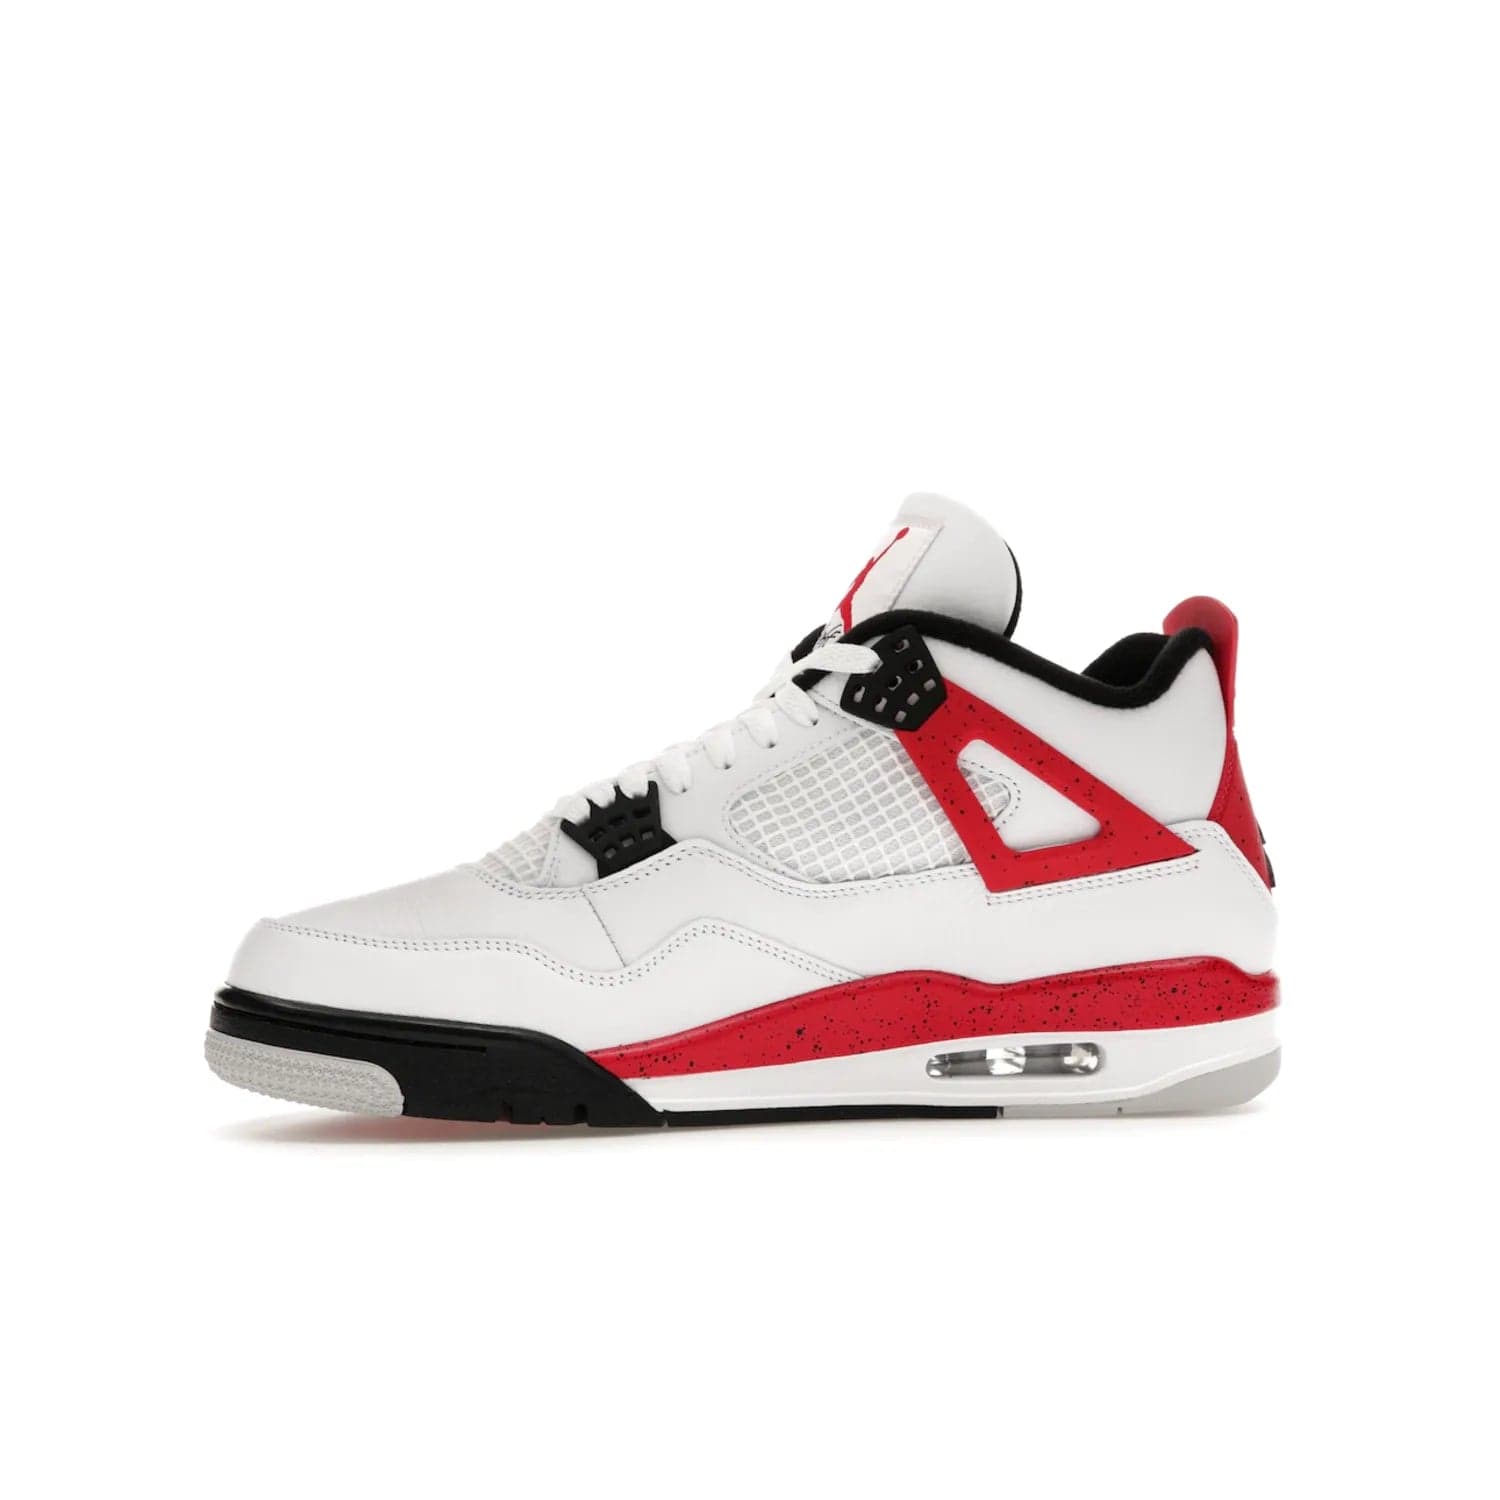 Jordan 4 Retro Red Cement - Image 18 - Only at www.BallersClubKickz.com - Iconic Jordan silhouette with a unique twist. White premium leather uppers with fire red and black detailing. Black, white, and fire red midsole with mesh detailing and Jumpman logo. Jordan 4 Retro Red Cement released with premium price.